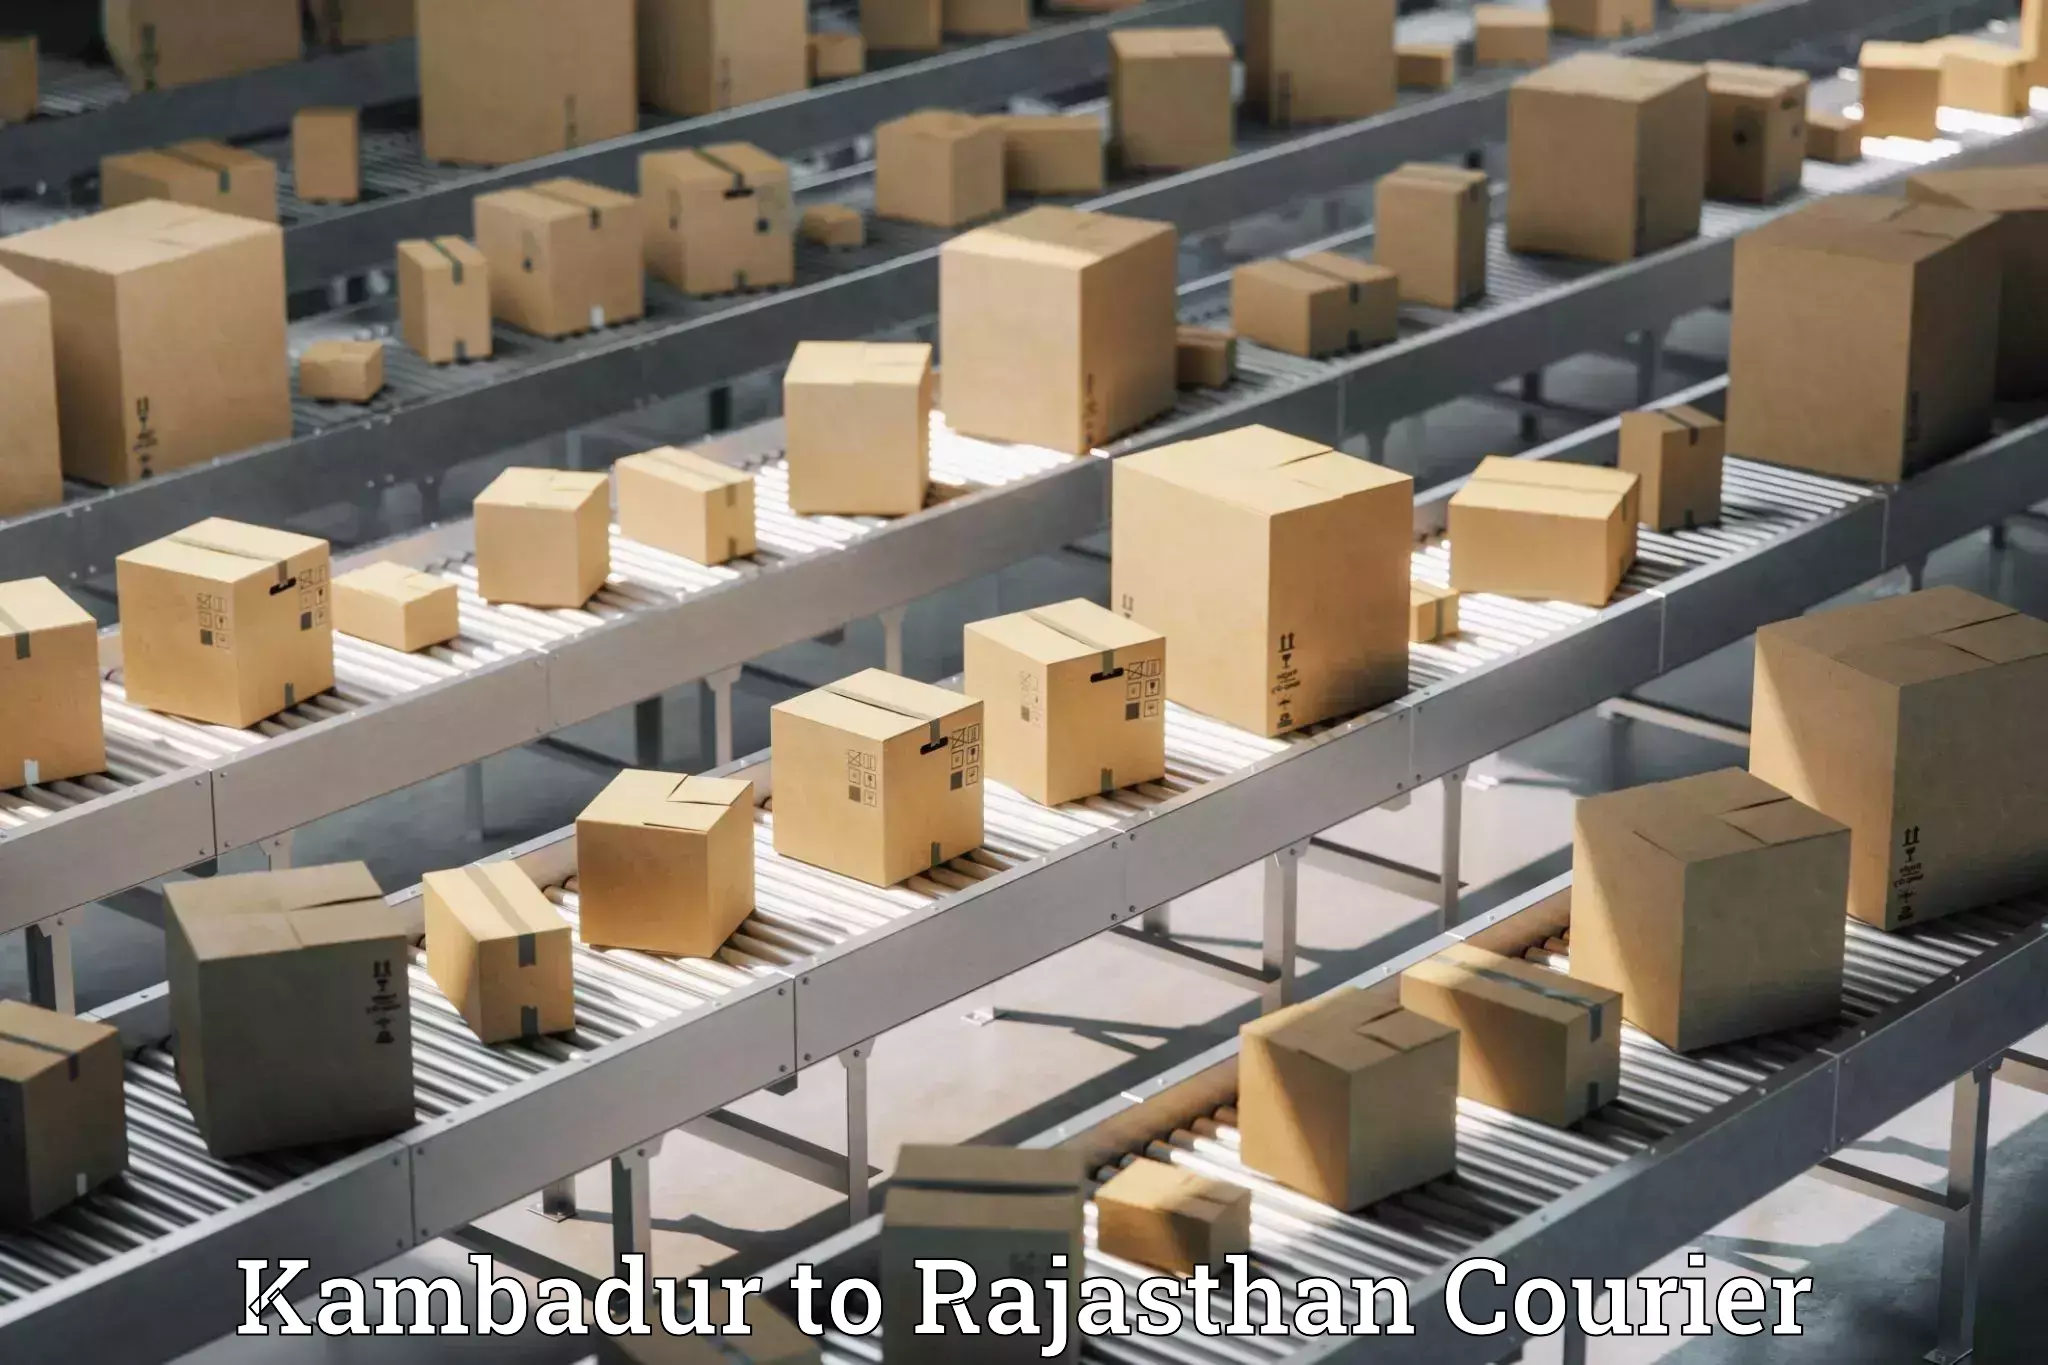 Reliable shipping partners Kambadur to Yeswanthapur